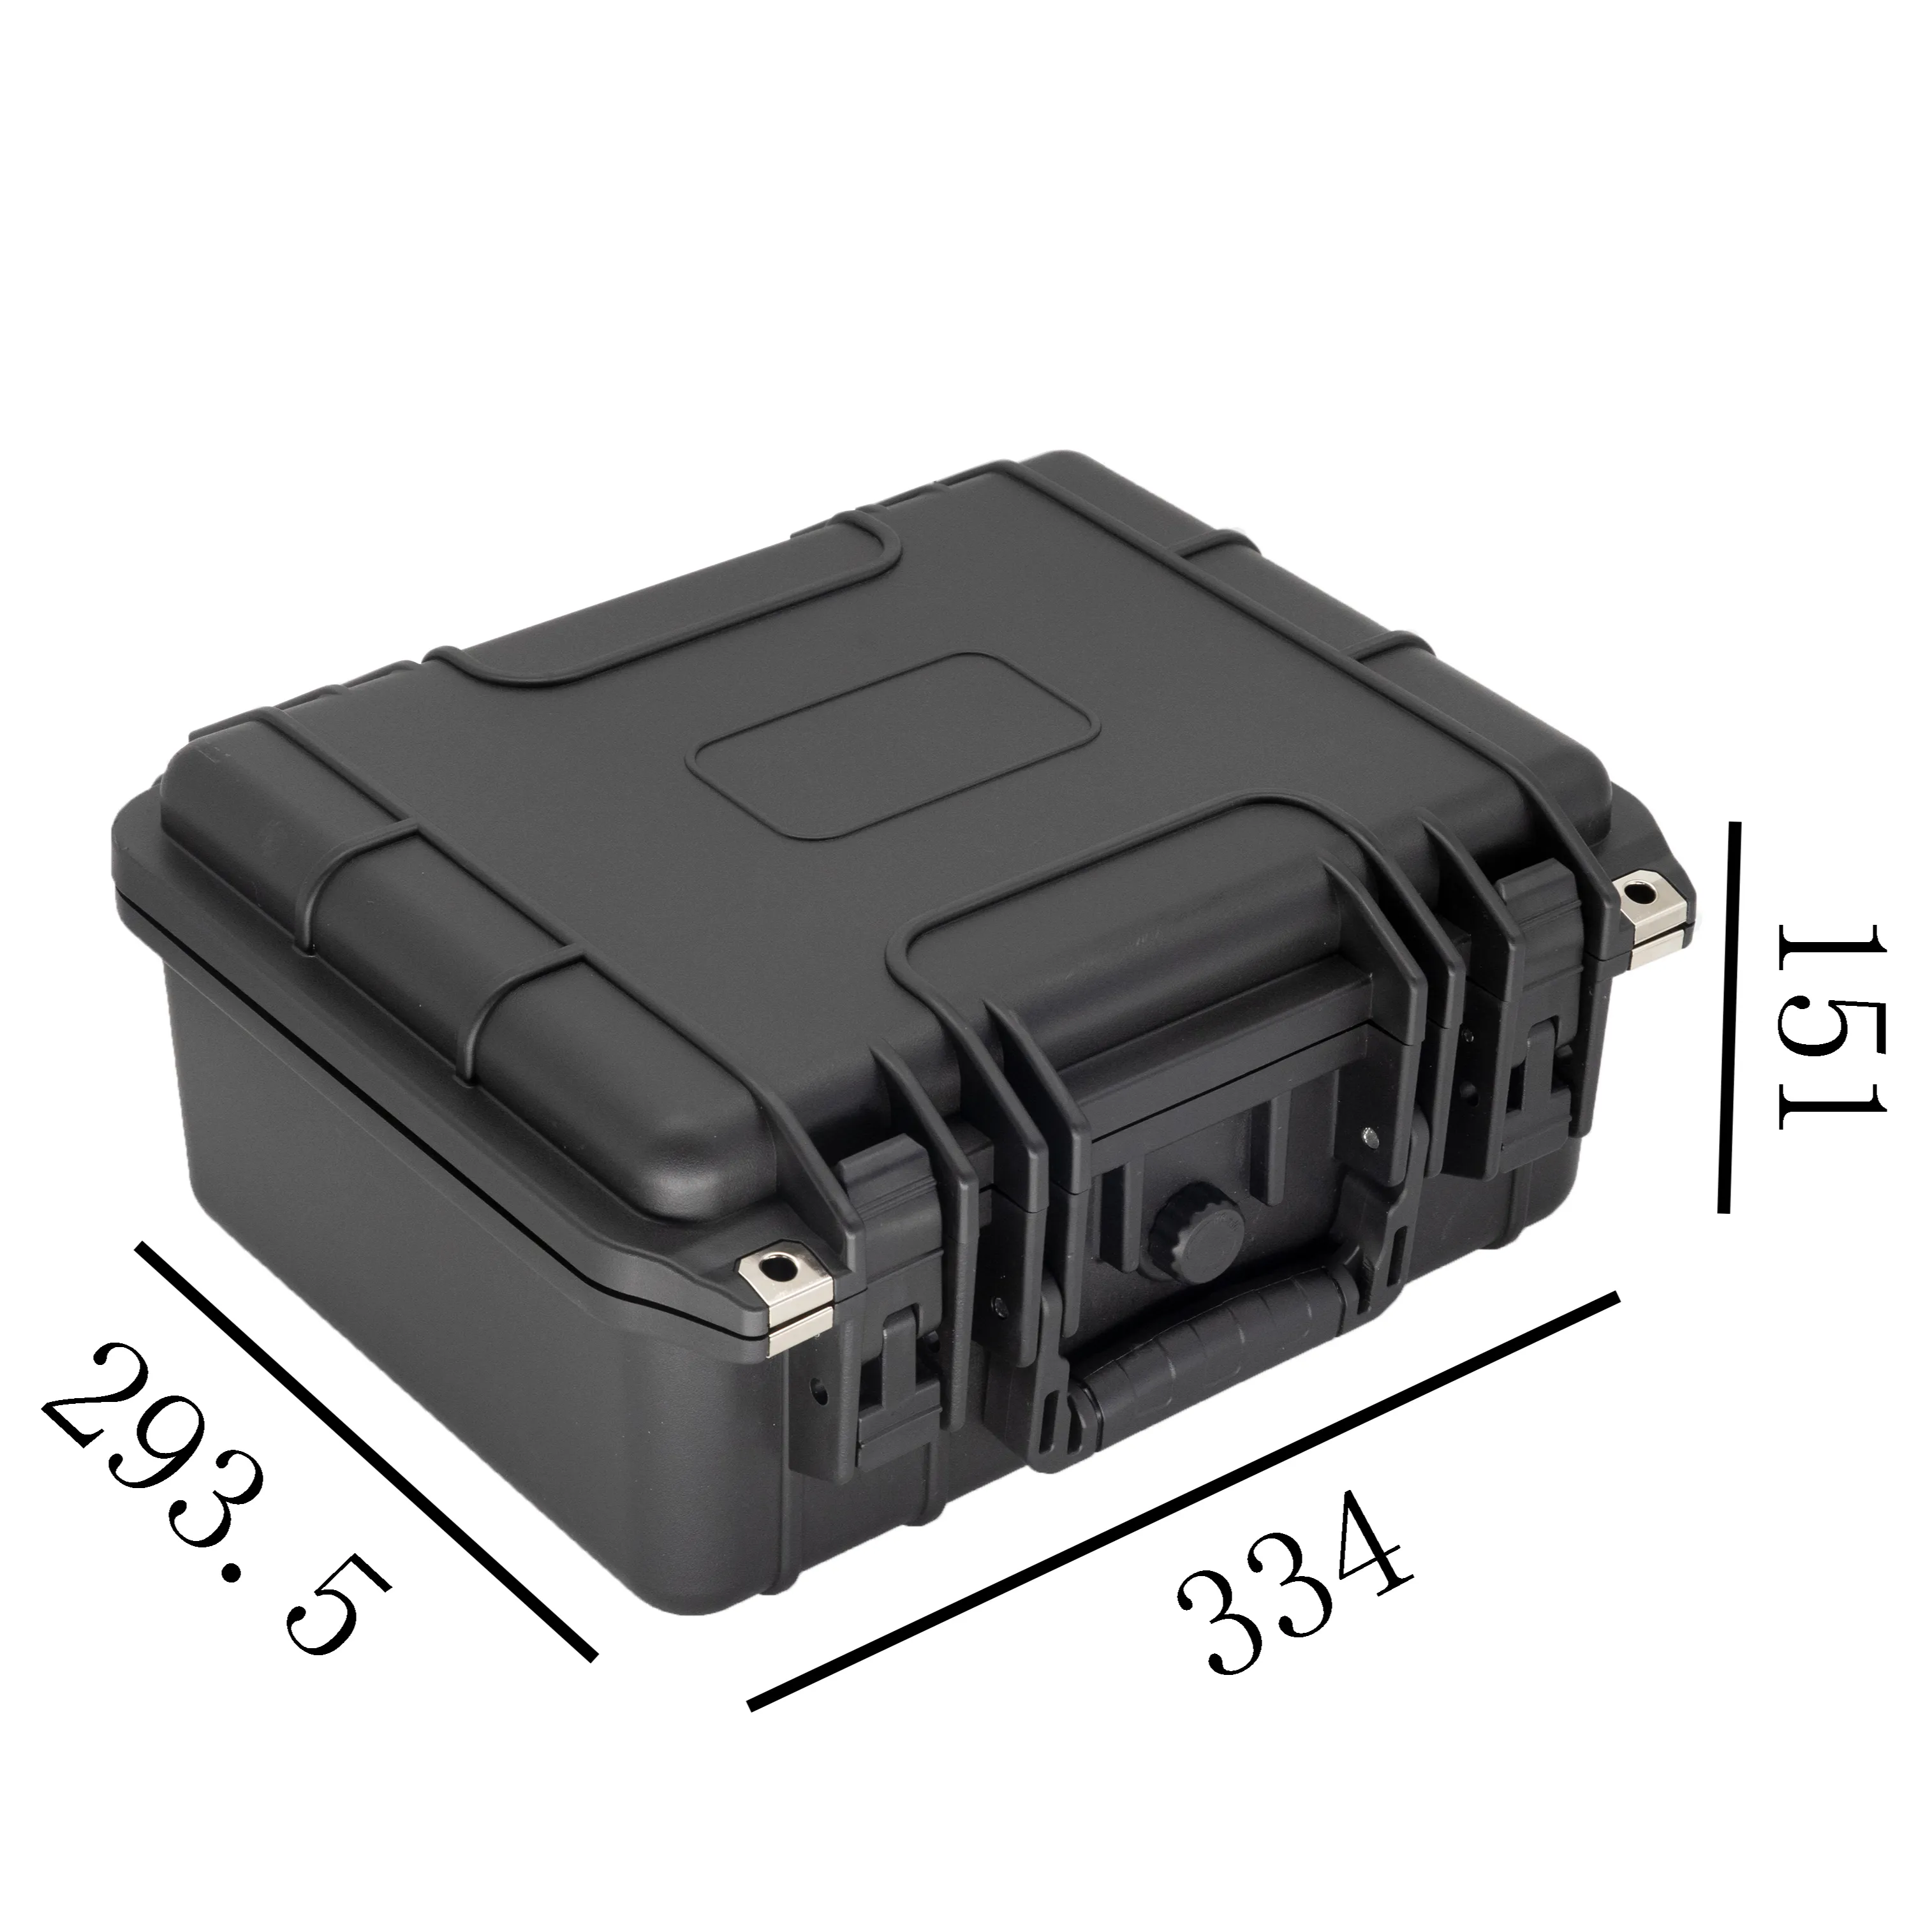 China factory ip67 watertight carrying portable plastic medical equipment case with foams WS5004-13,hard box